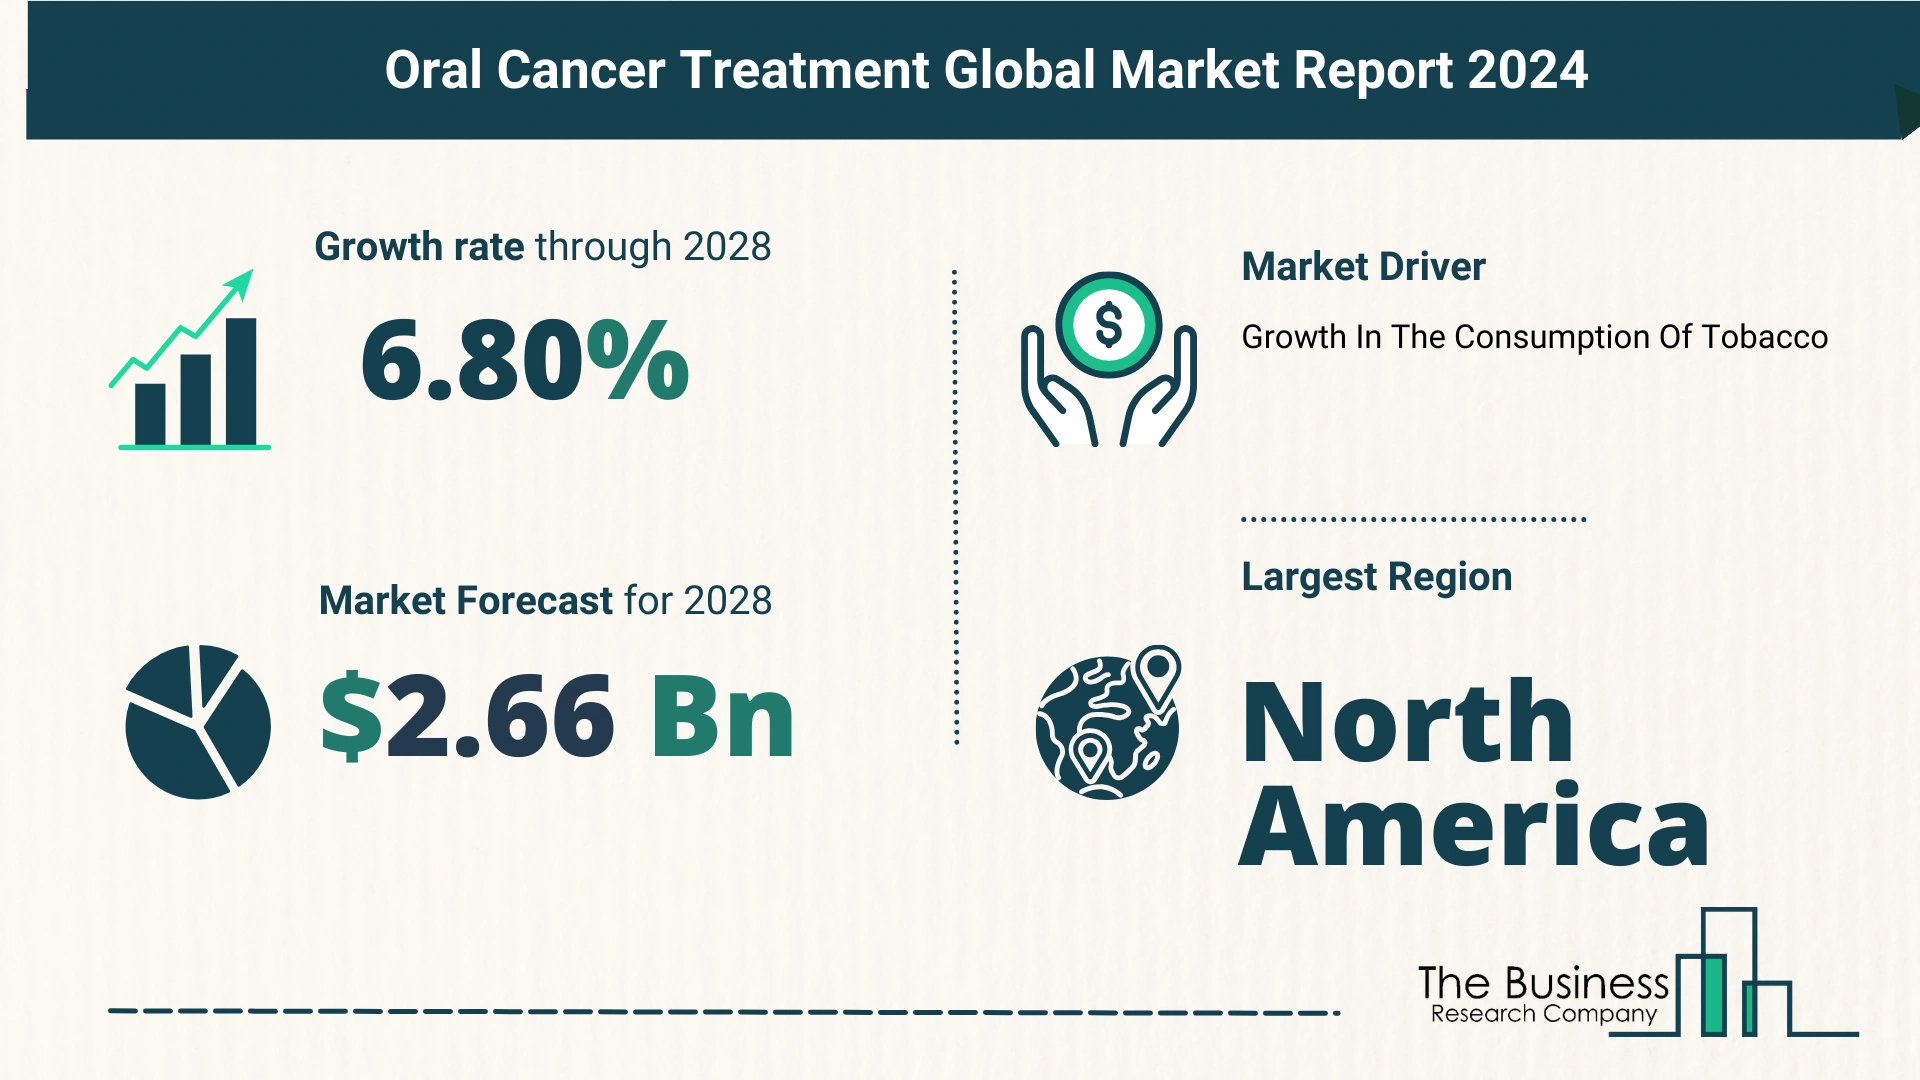 Key Insights On The Oral Cancer Treatment Market 2024 – Size, Driver, And Major Players